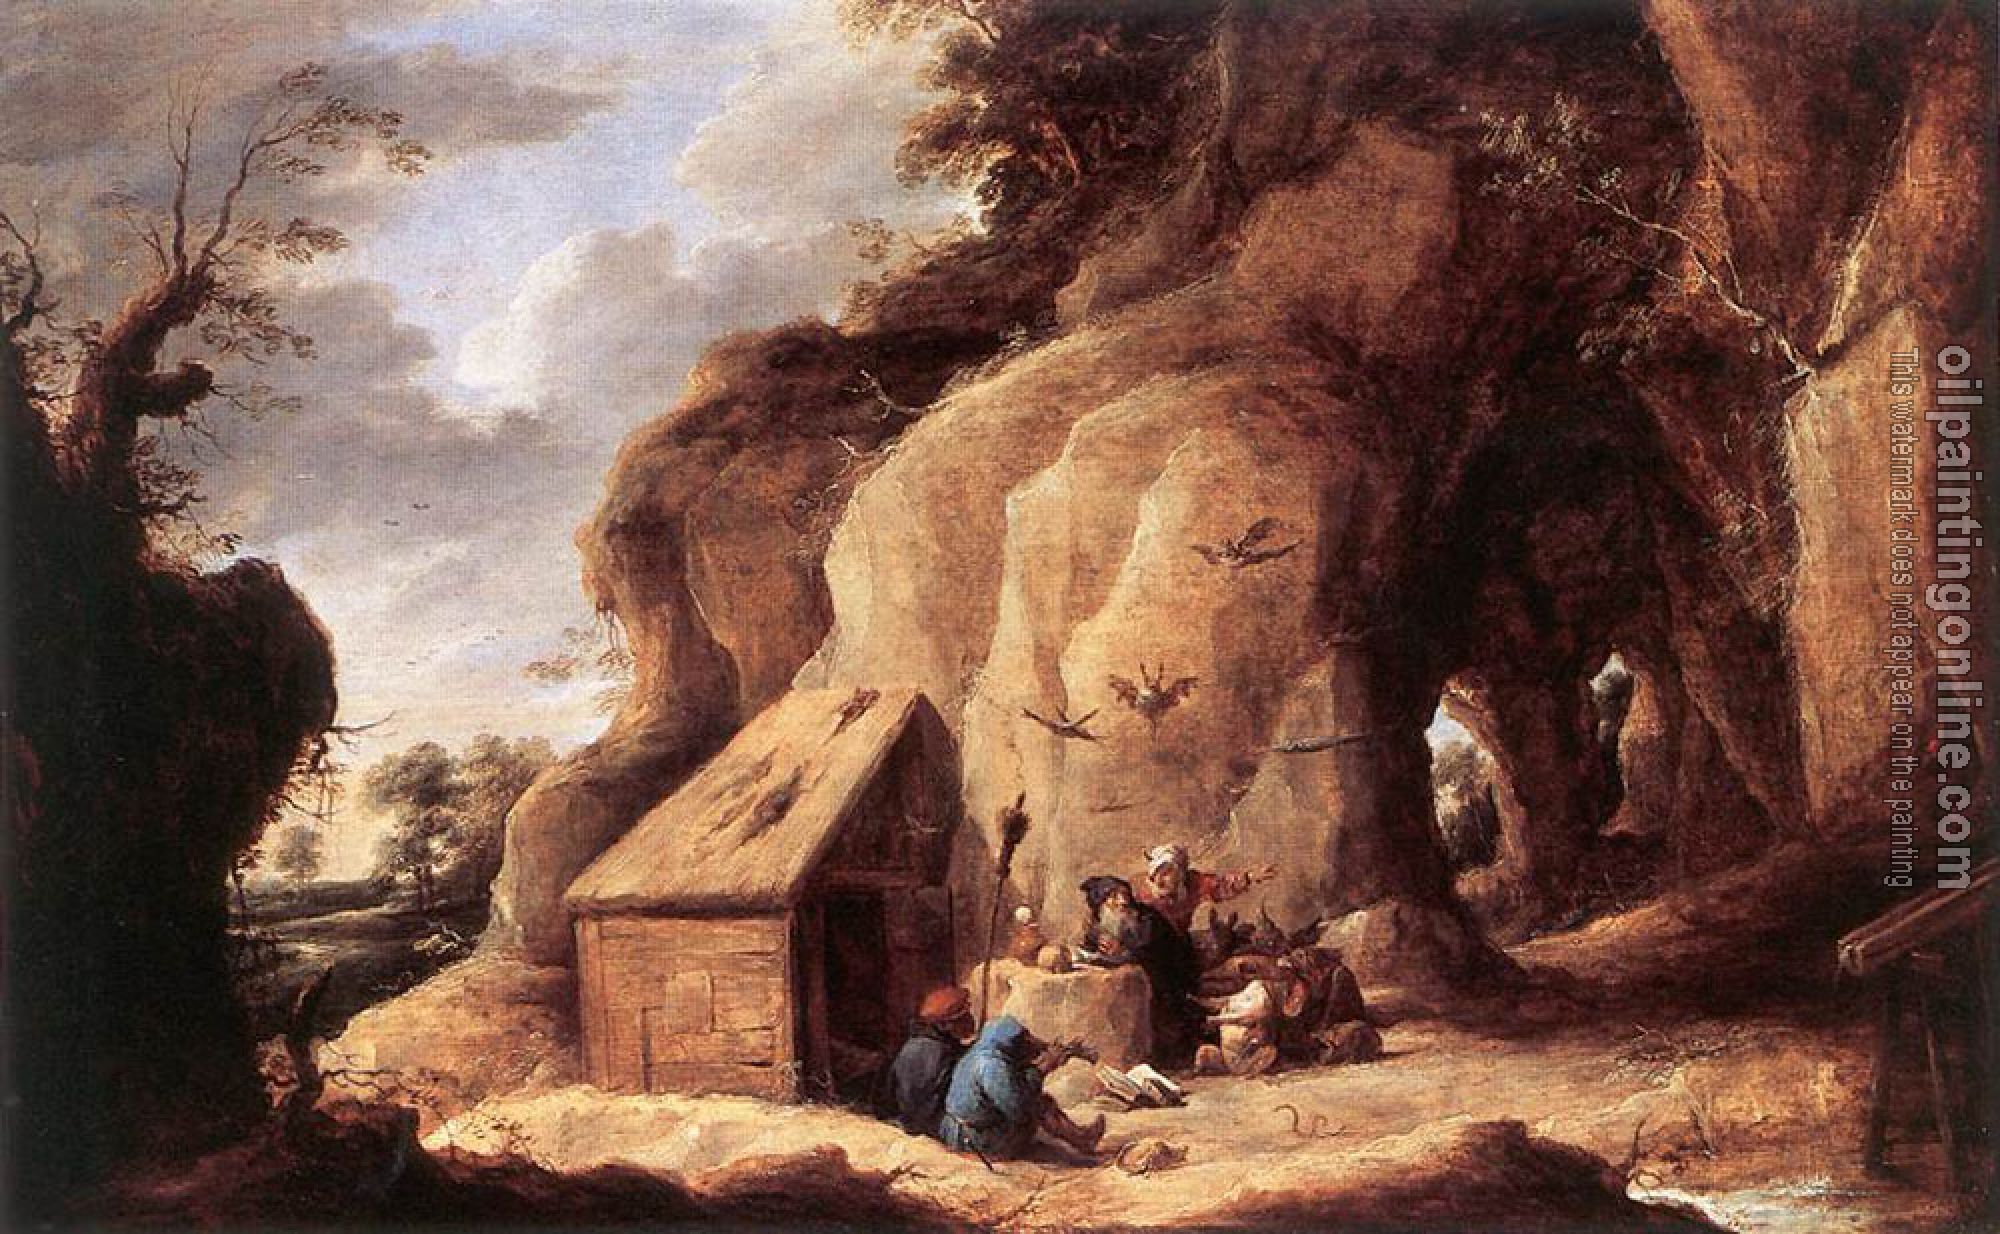 David Teniers the Younger - The Temptation Of St Anthony